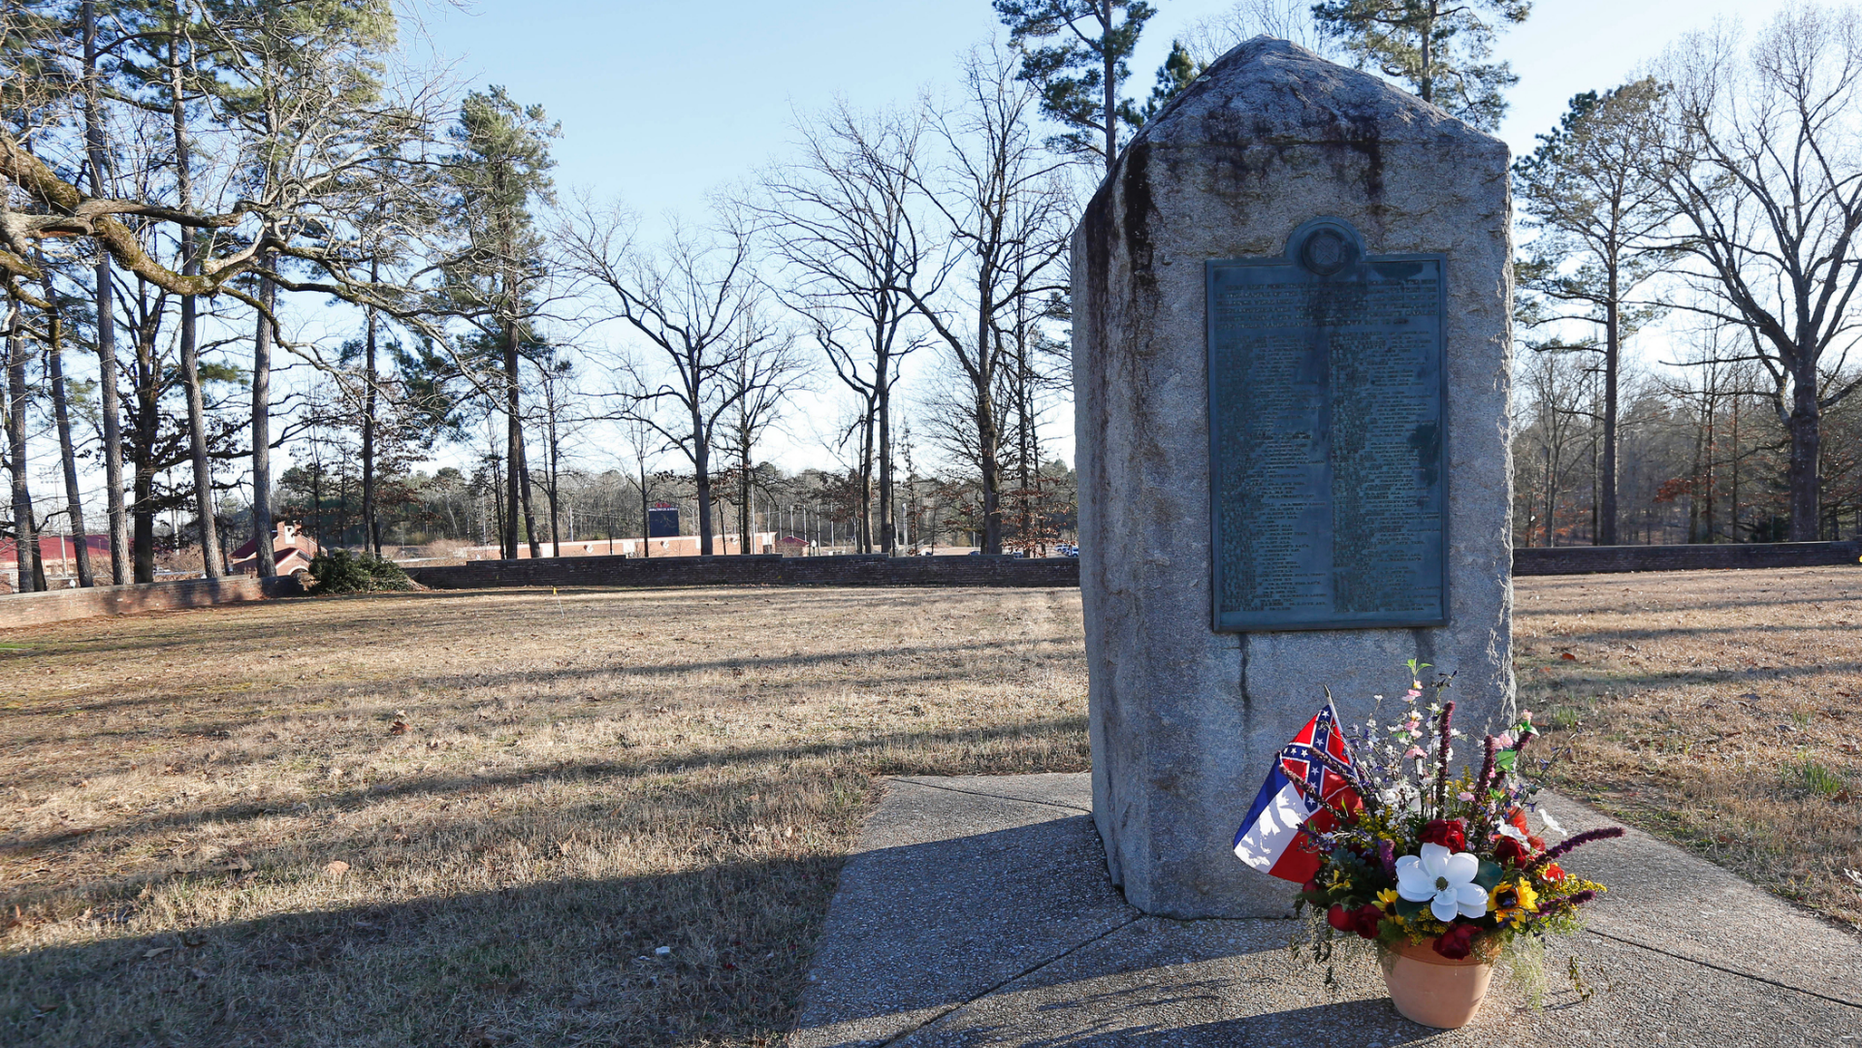 File-This March 5, 2019, file photo shows a memorial marker standing in the University of Mississippi campus cemetery that has the graves of Confederate soldiers killed at the Battle of Shiloh.  The University of Mississippi's leader says he agrees that a Confederate monument should be shifted from its current spot on campus. Interim Chancellor Larry Sparks said in a Thursday, March 21, 2019, statement that he is consulting with historic preservation officials on relocating the statue. (AP Photo/Rogelio V. Solis, File)